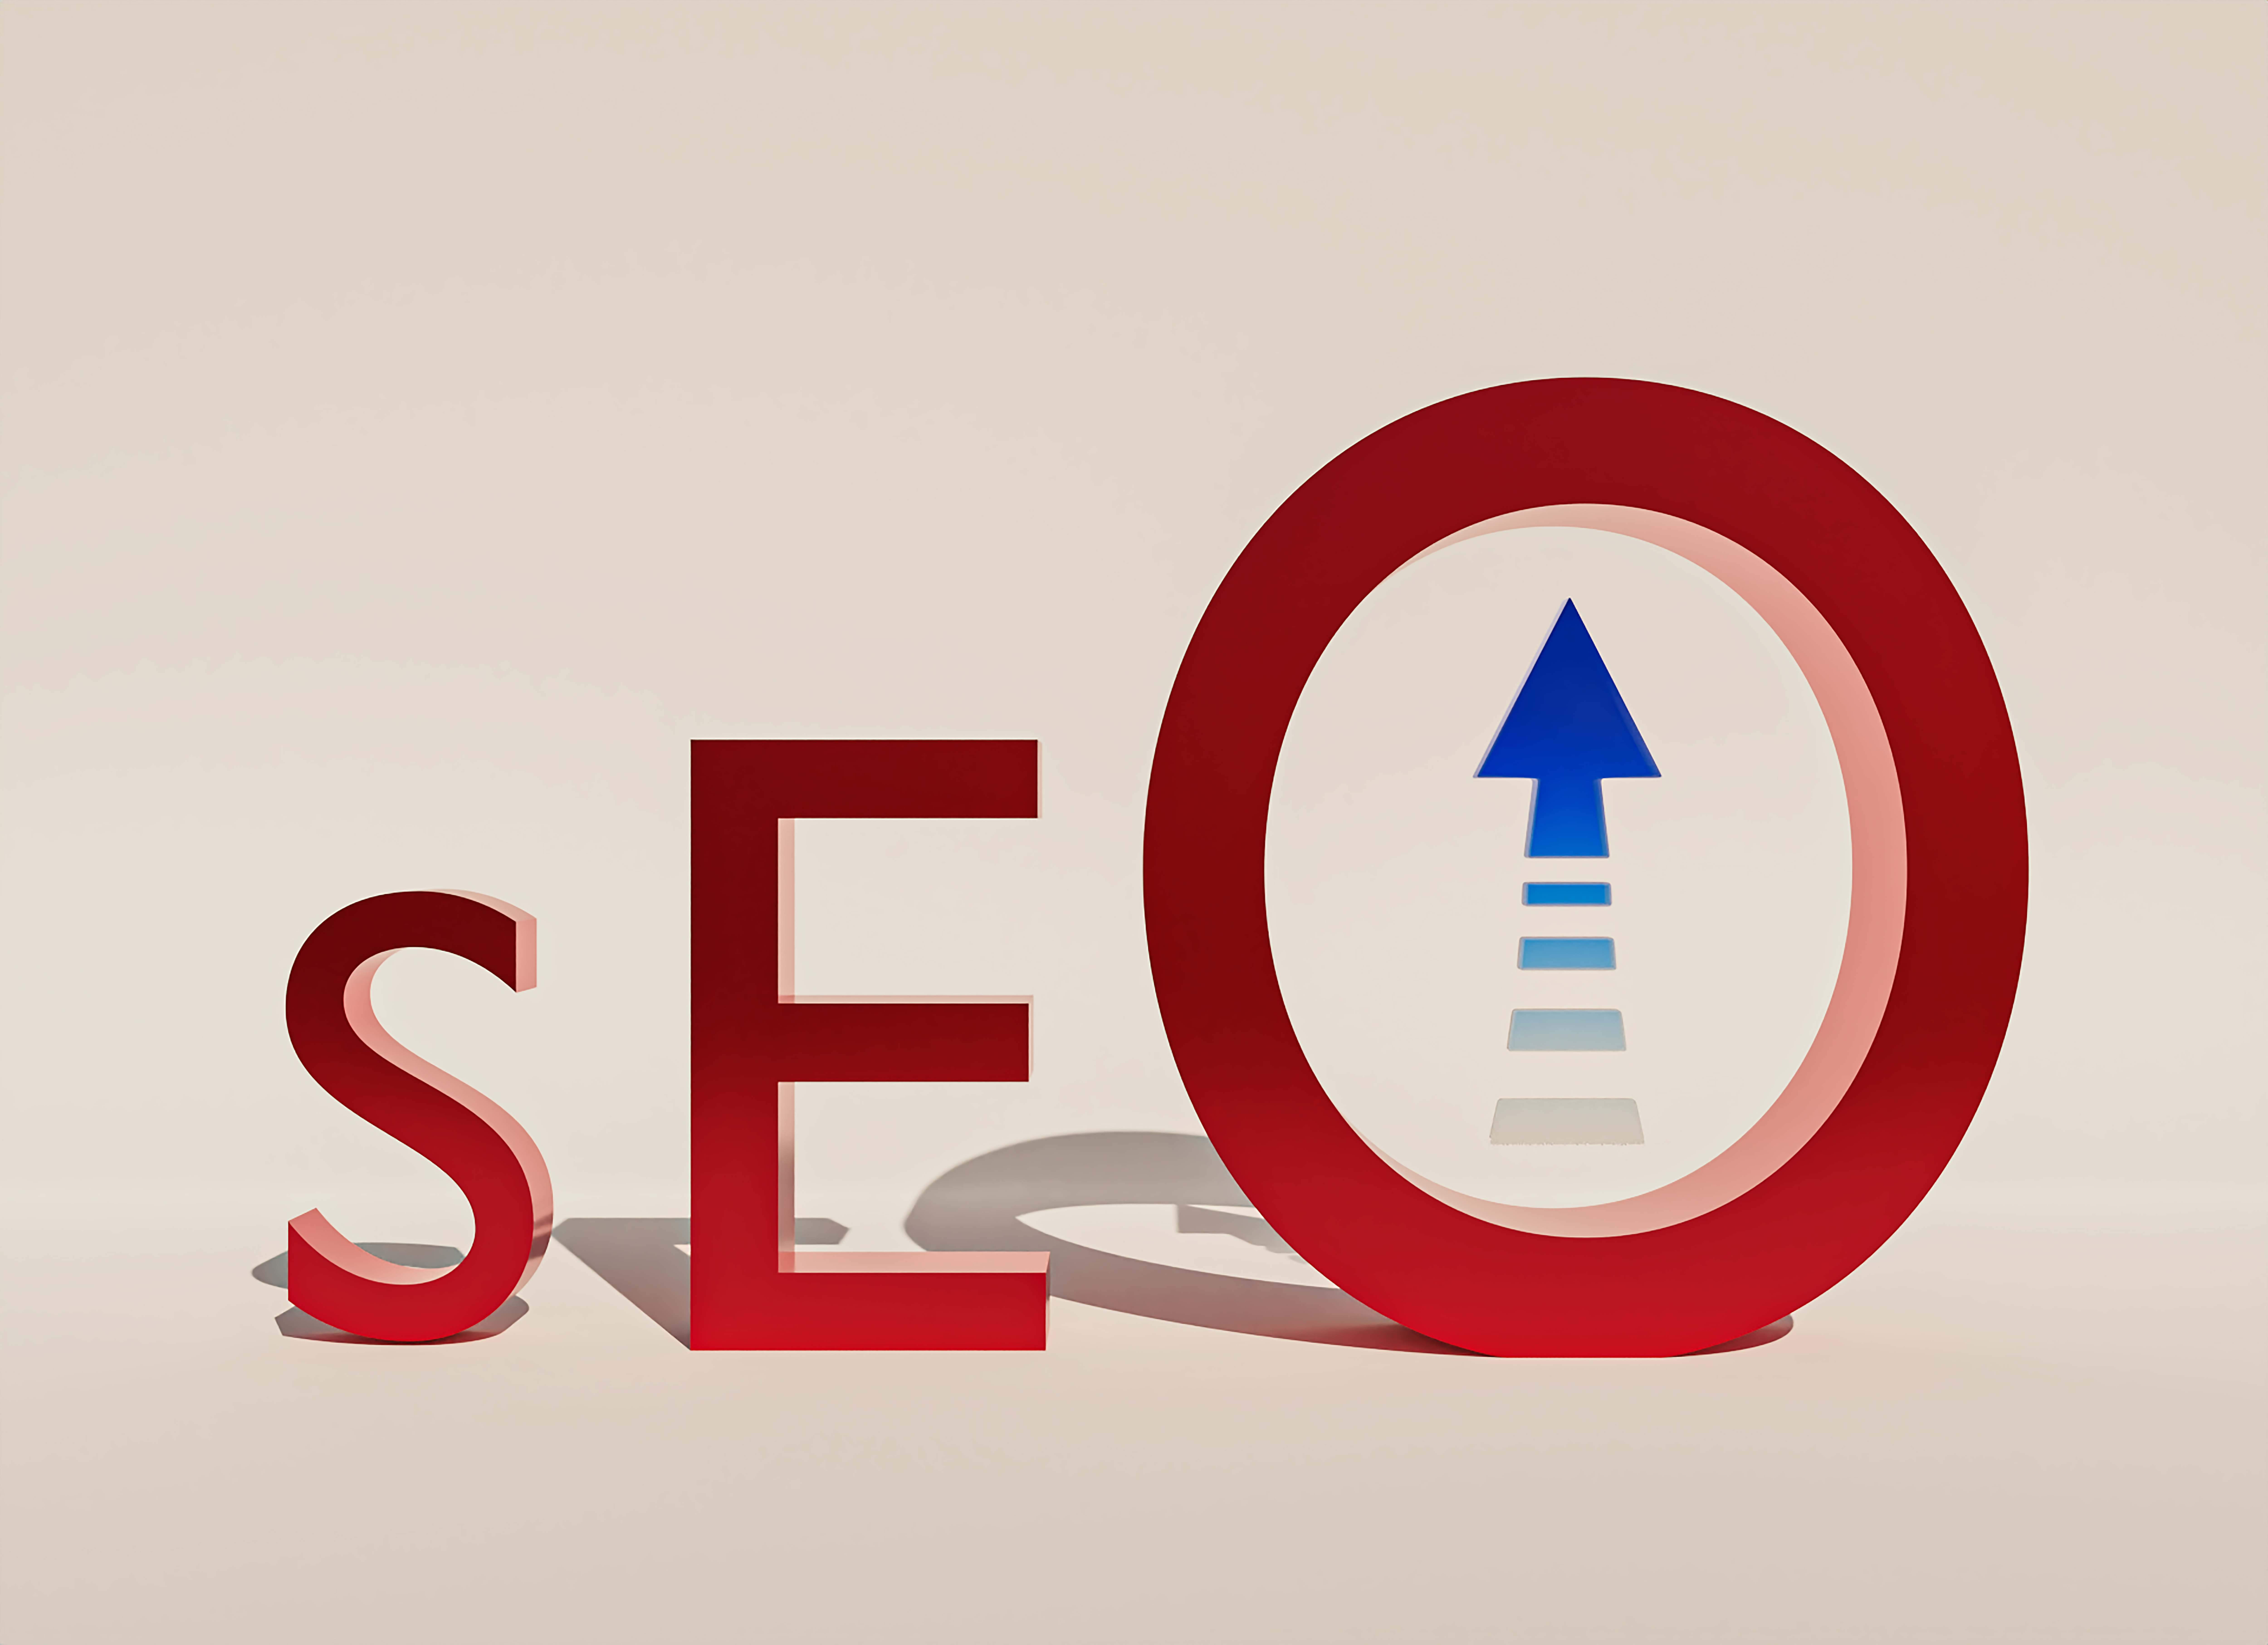 Getting your website ready for the last quarter of the year. SEO letters